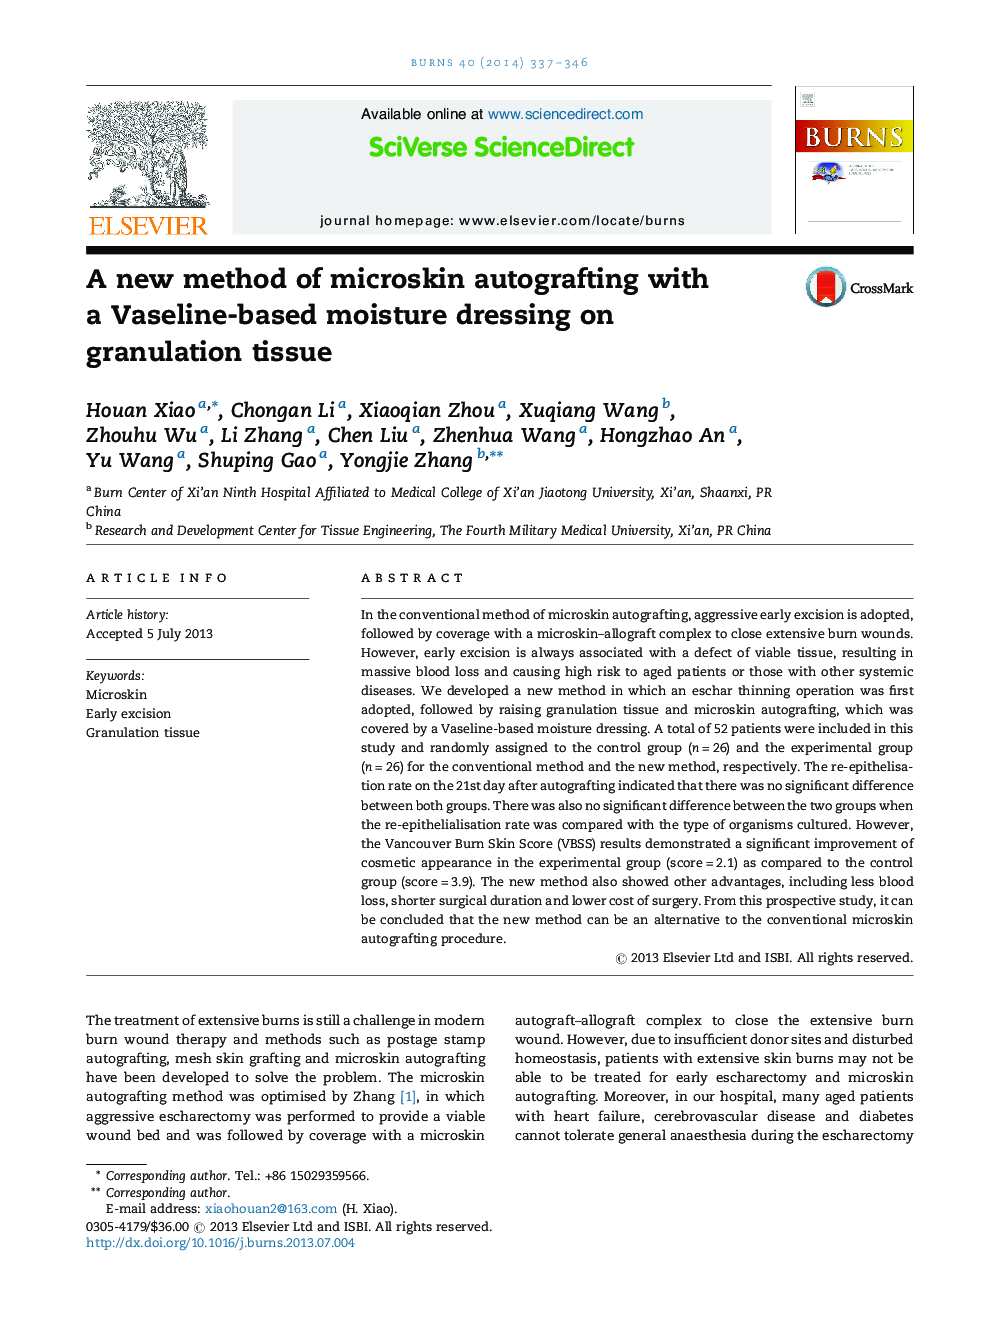 A new method of microskin autografting with a Vaseline-based moisture dressing on granulation tissue